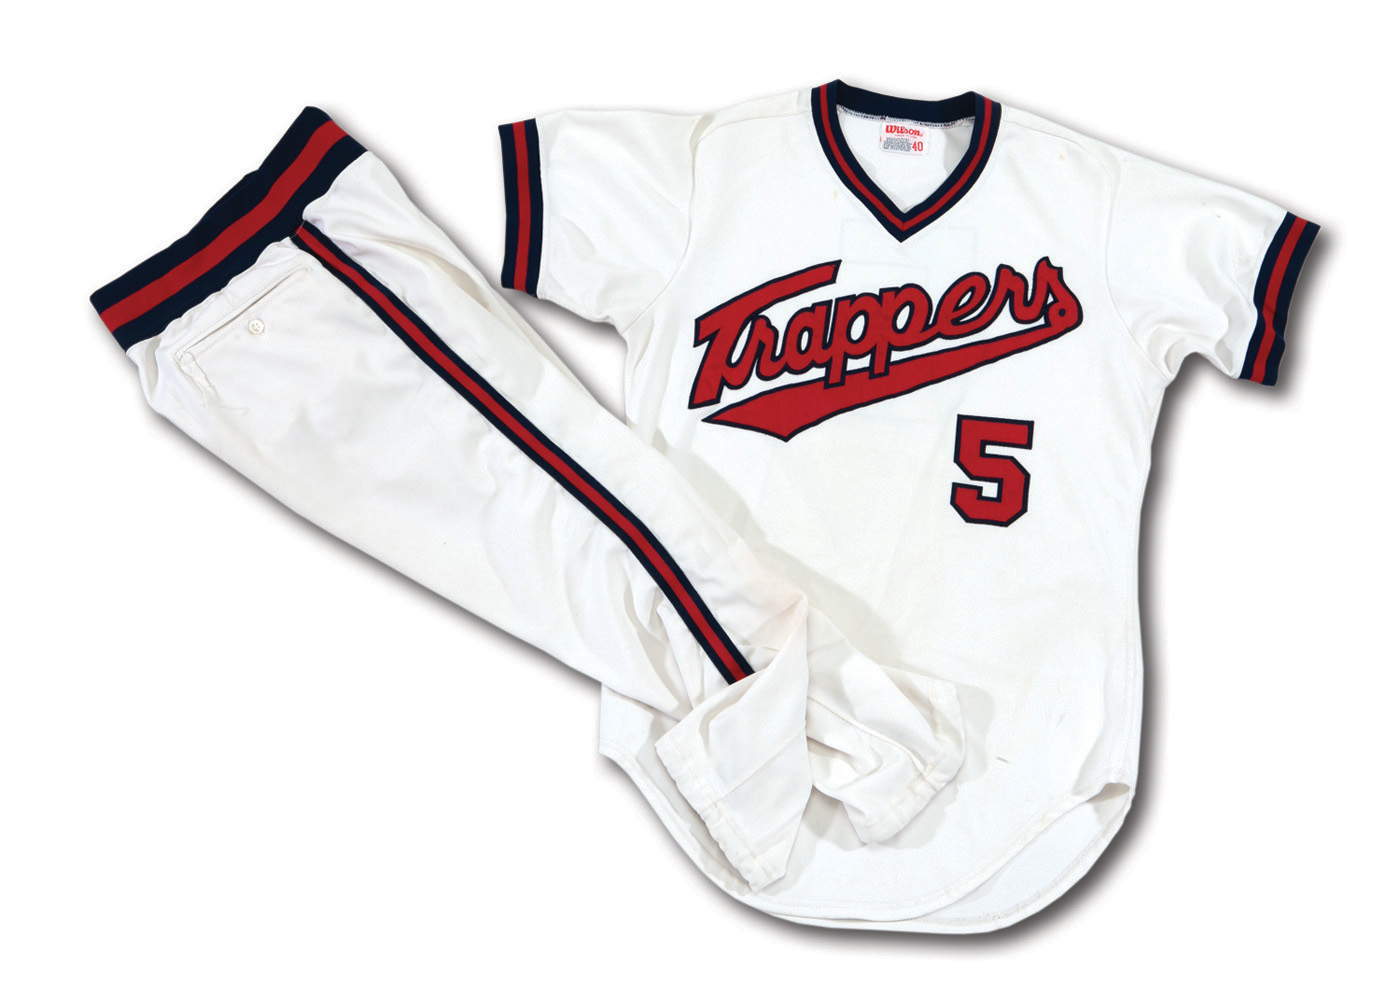 Authentic Vintage 1980s Edmonton Tappers Baseball Jersey 27 